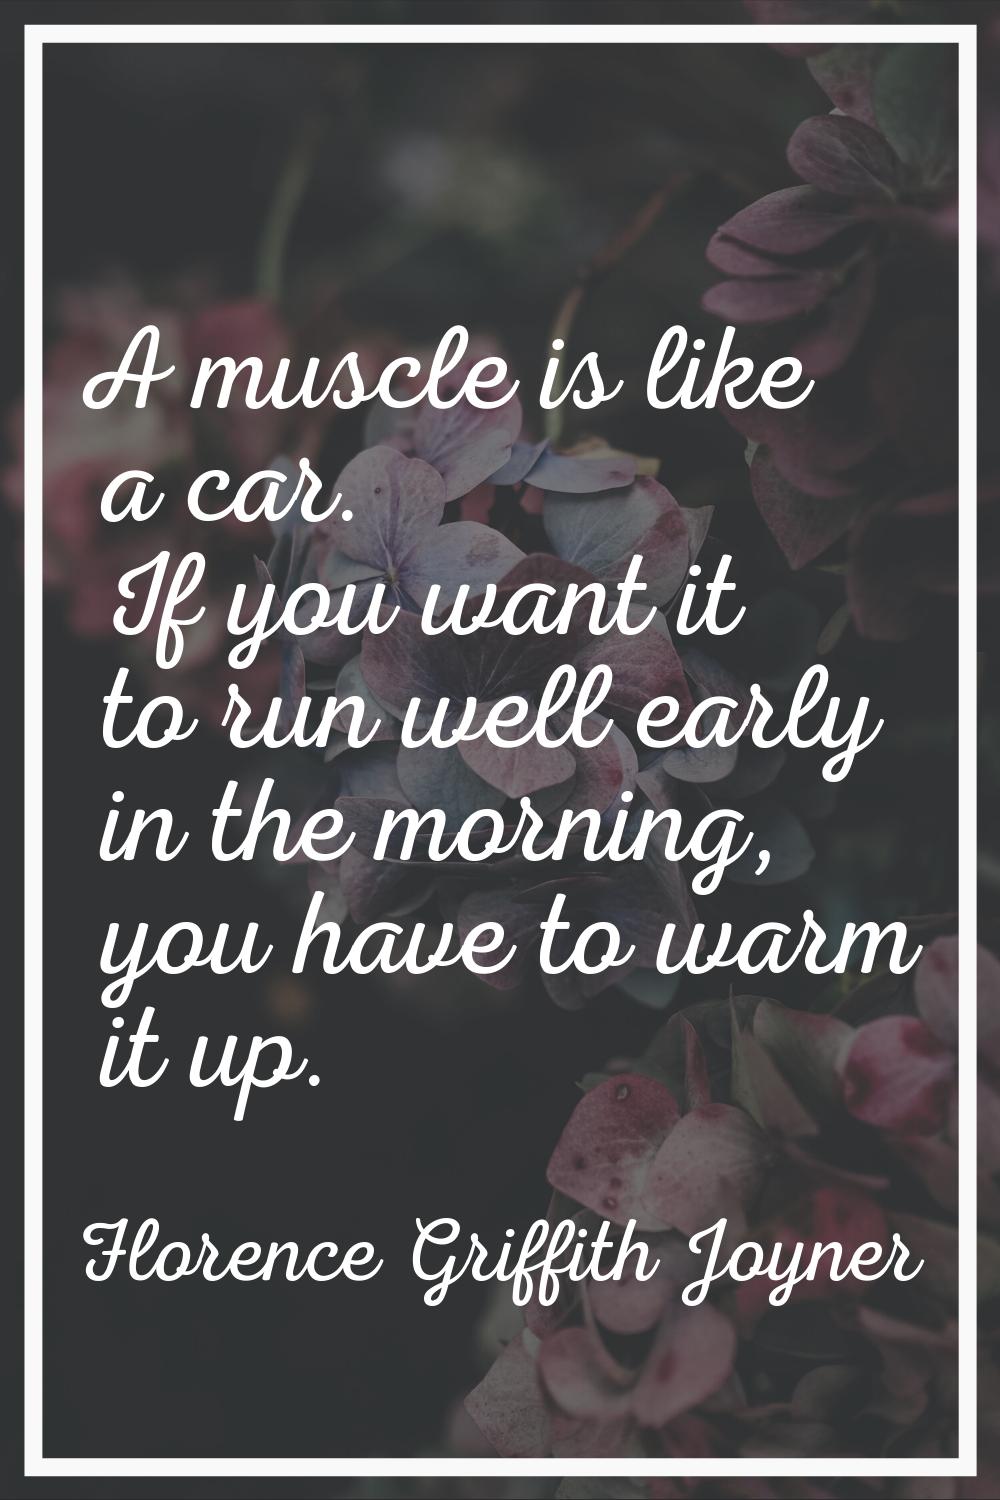 A muscle is like a car. If you want it to run well early in the morning, you have to warm it up.